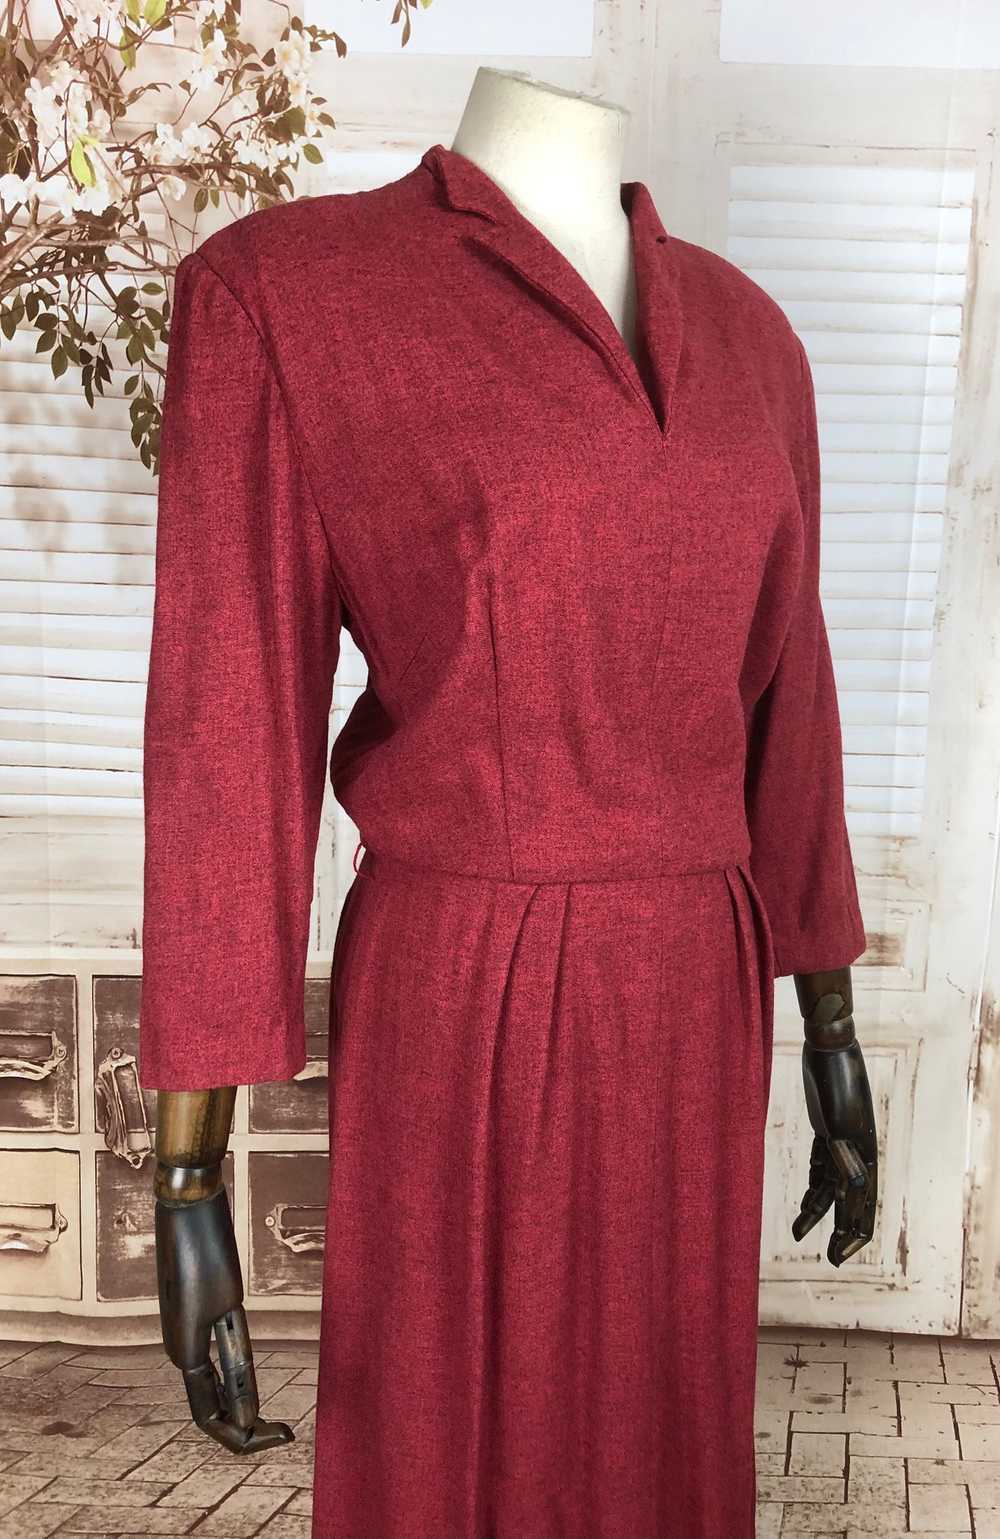 Original Late 1940s 40s Vintage Red Casual Dress - image 6